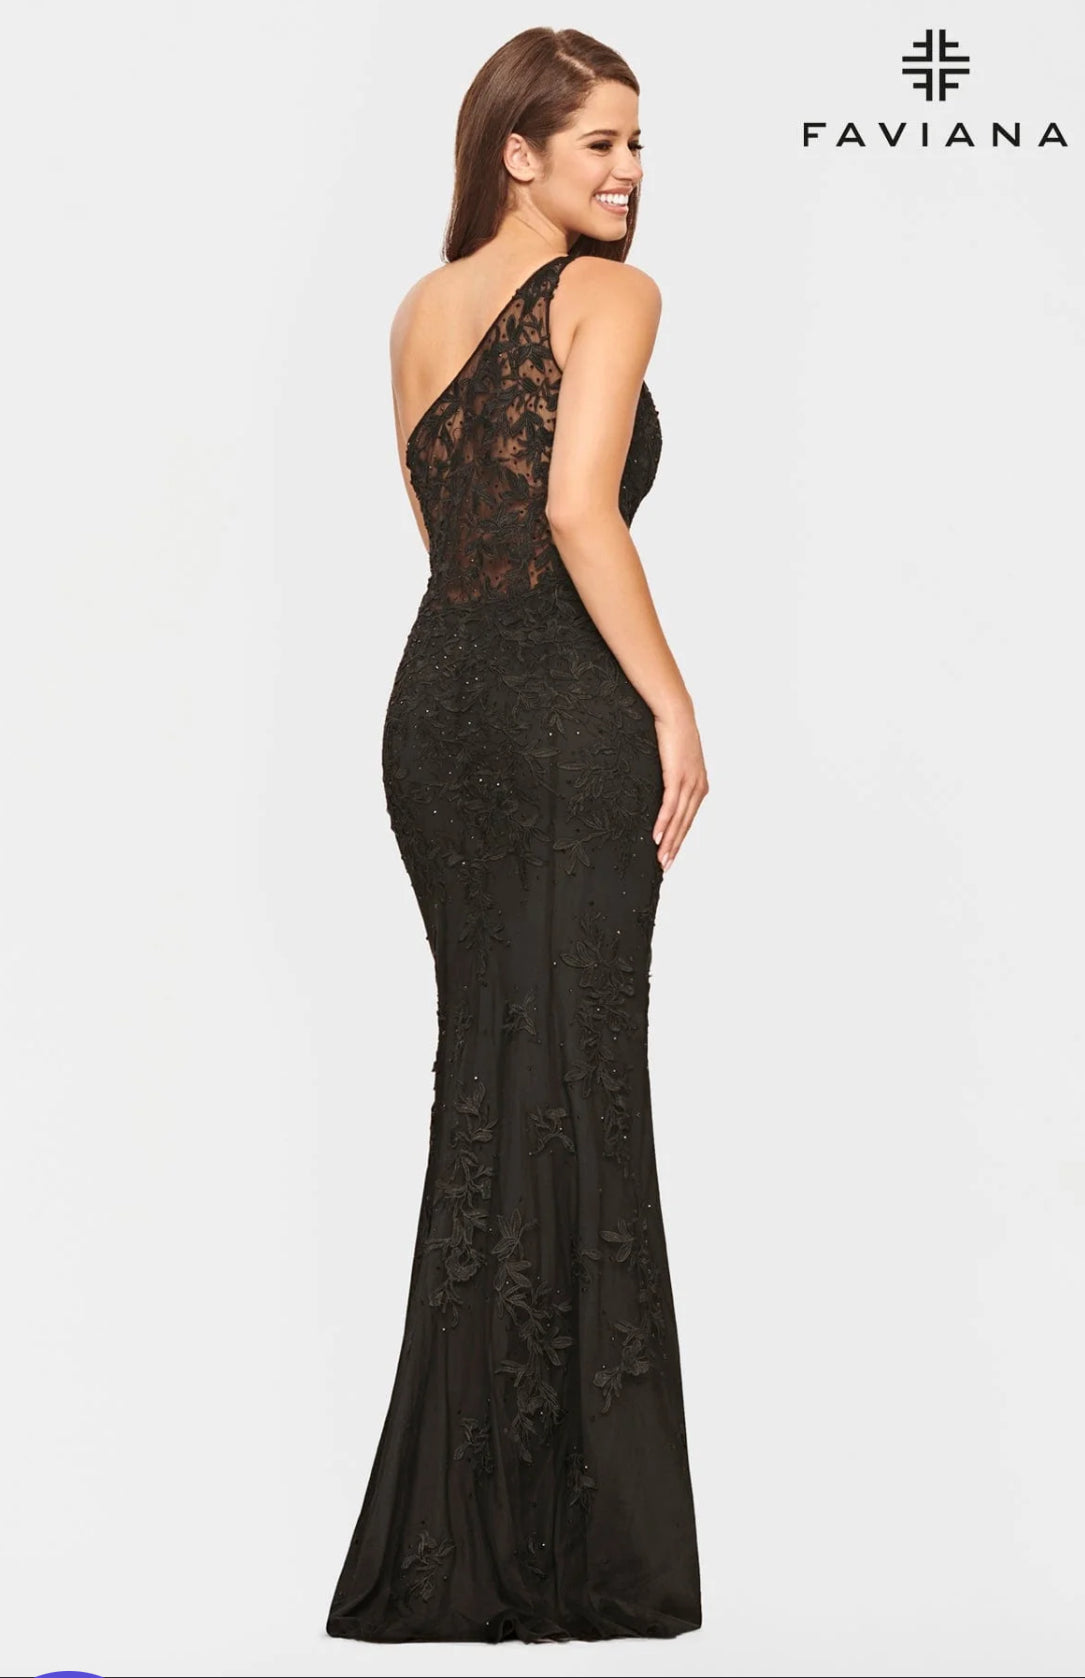 Black One Shoulder Lace Dress With Mermaid Skirt FAVIANA S10822